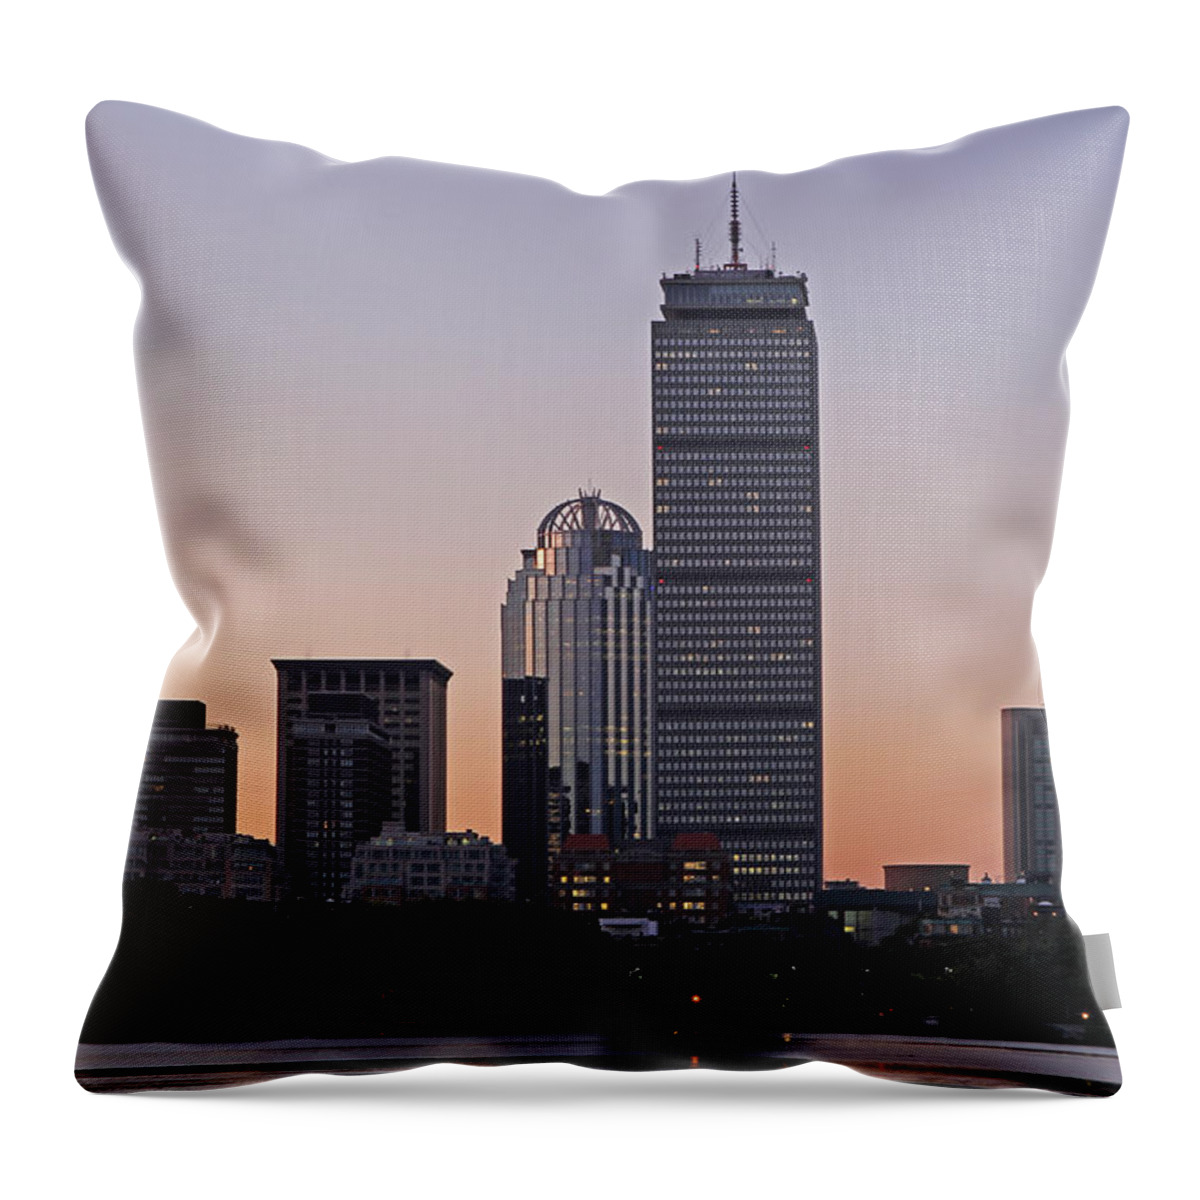 Boston Throw Pillow featuring the photograph Boston Sunrise Sky by Juergen Roth